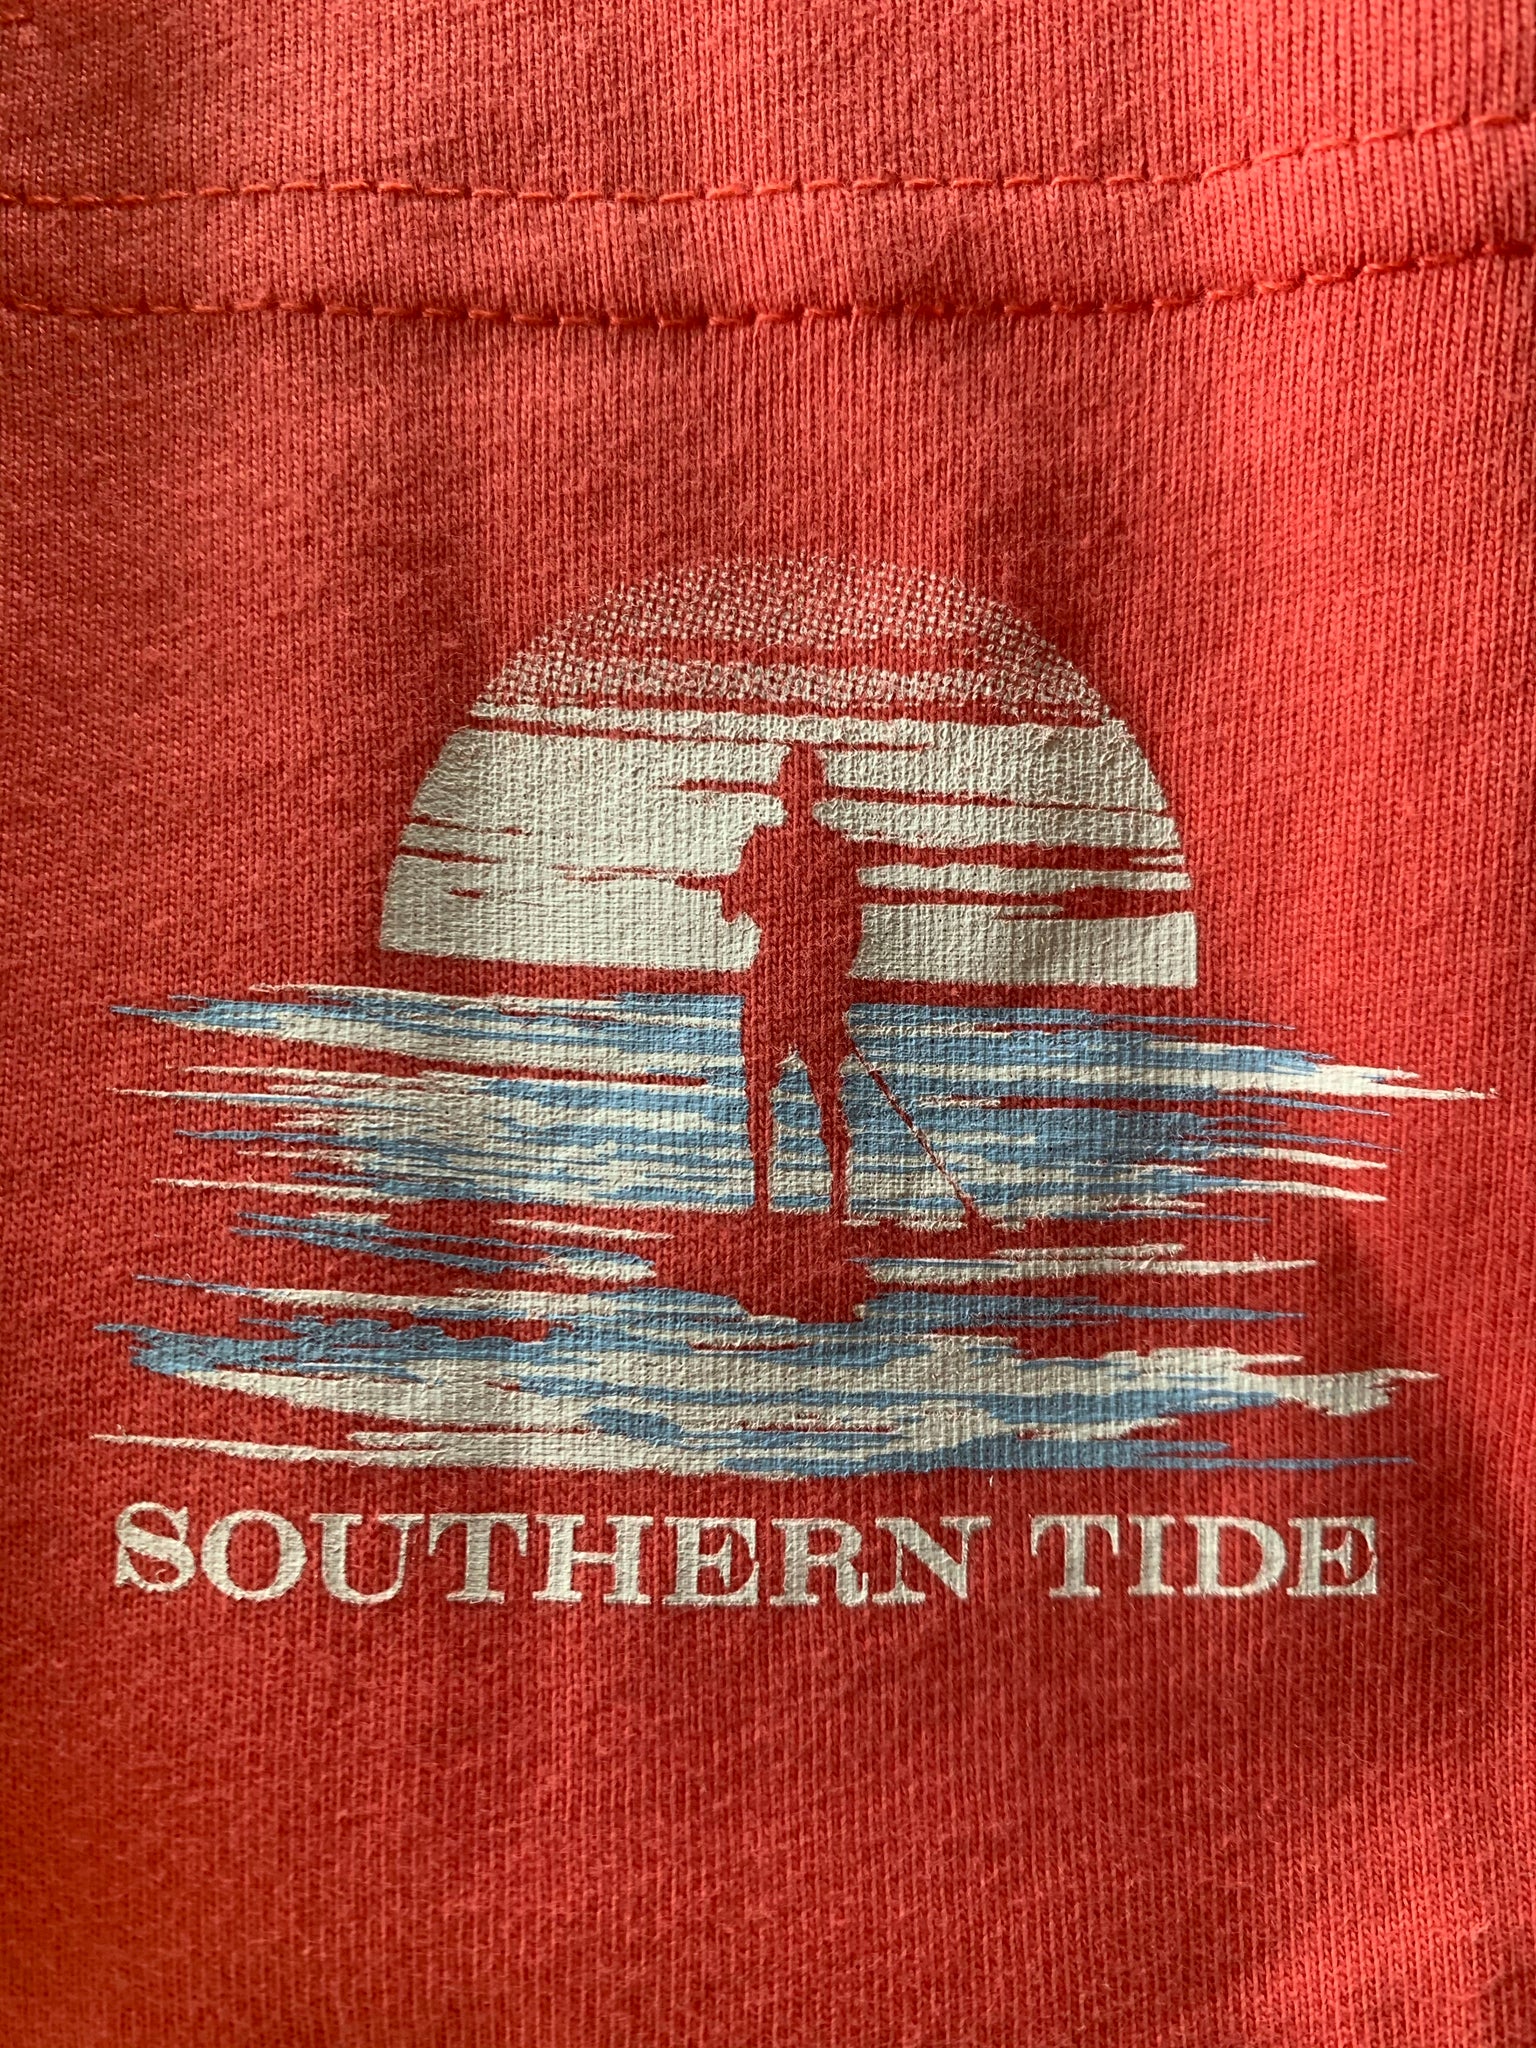 Southern Tide Short Sleeve Graphic T-Shirts